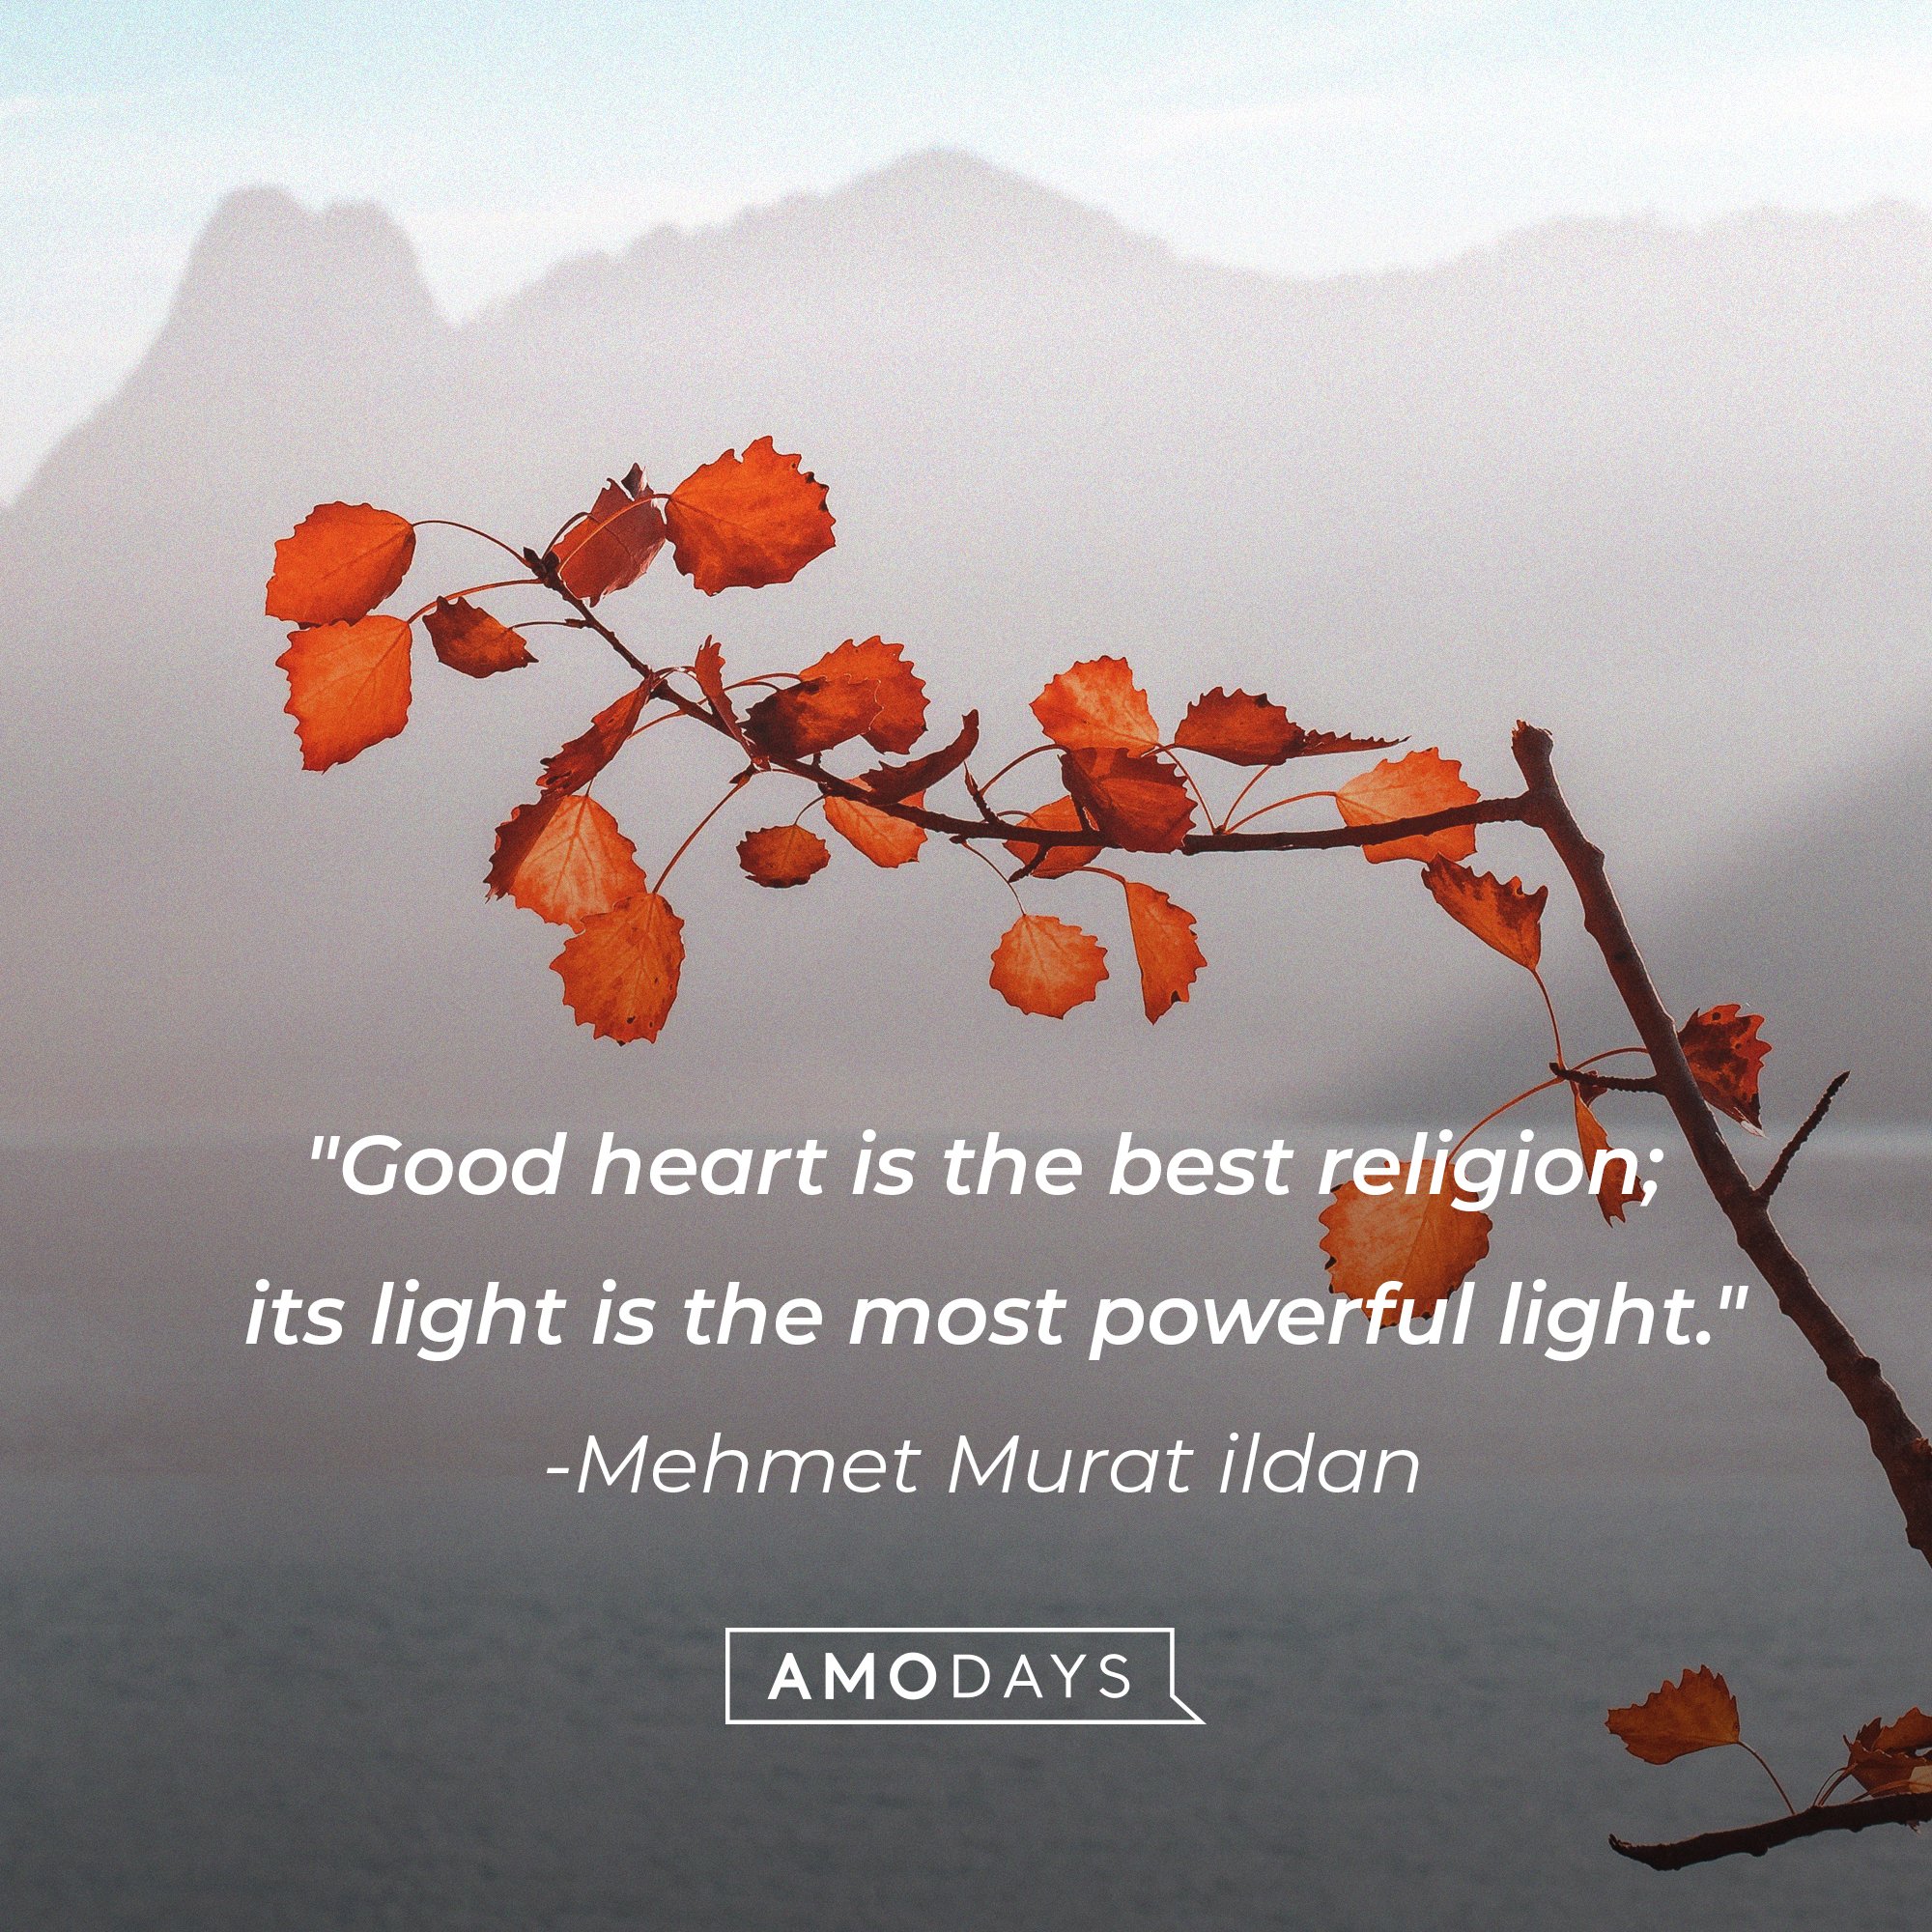 Mehmet Murat ildan’s quote: "Good heart is the best religion; its light is the most powerful light." | Image: AmoDays